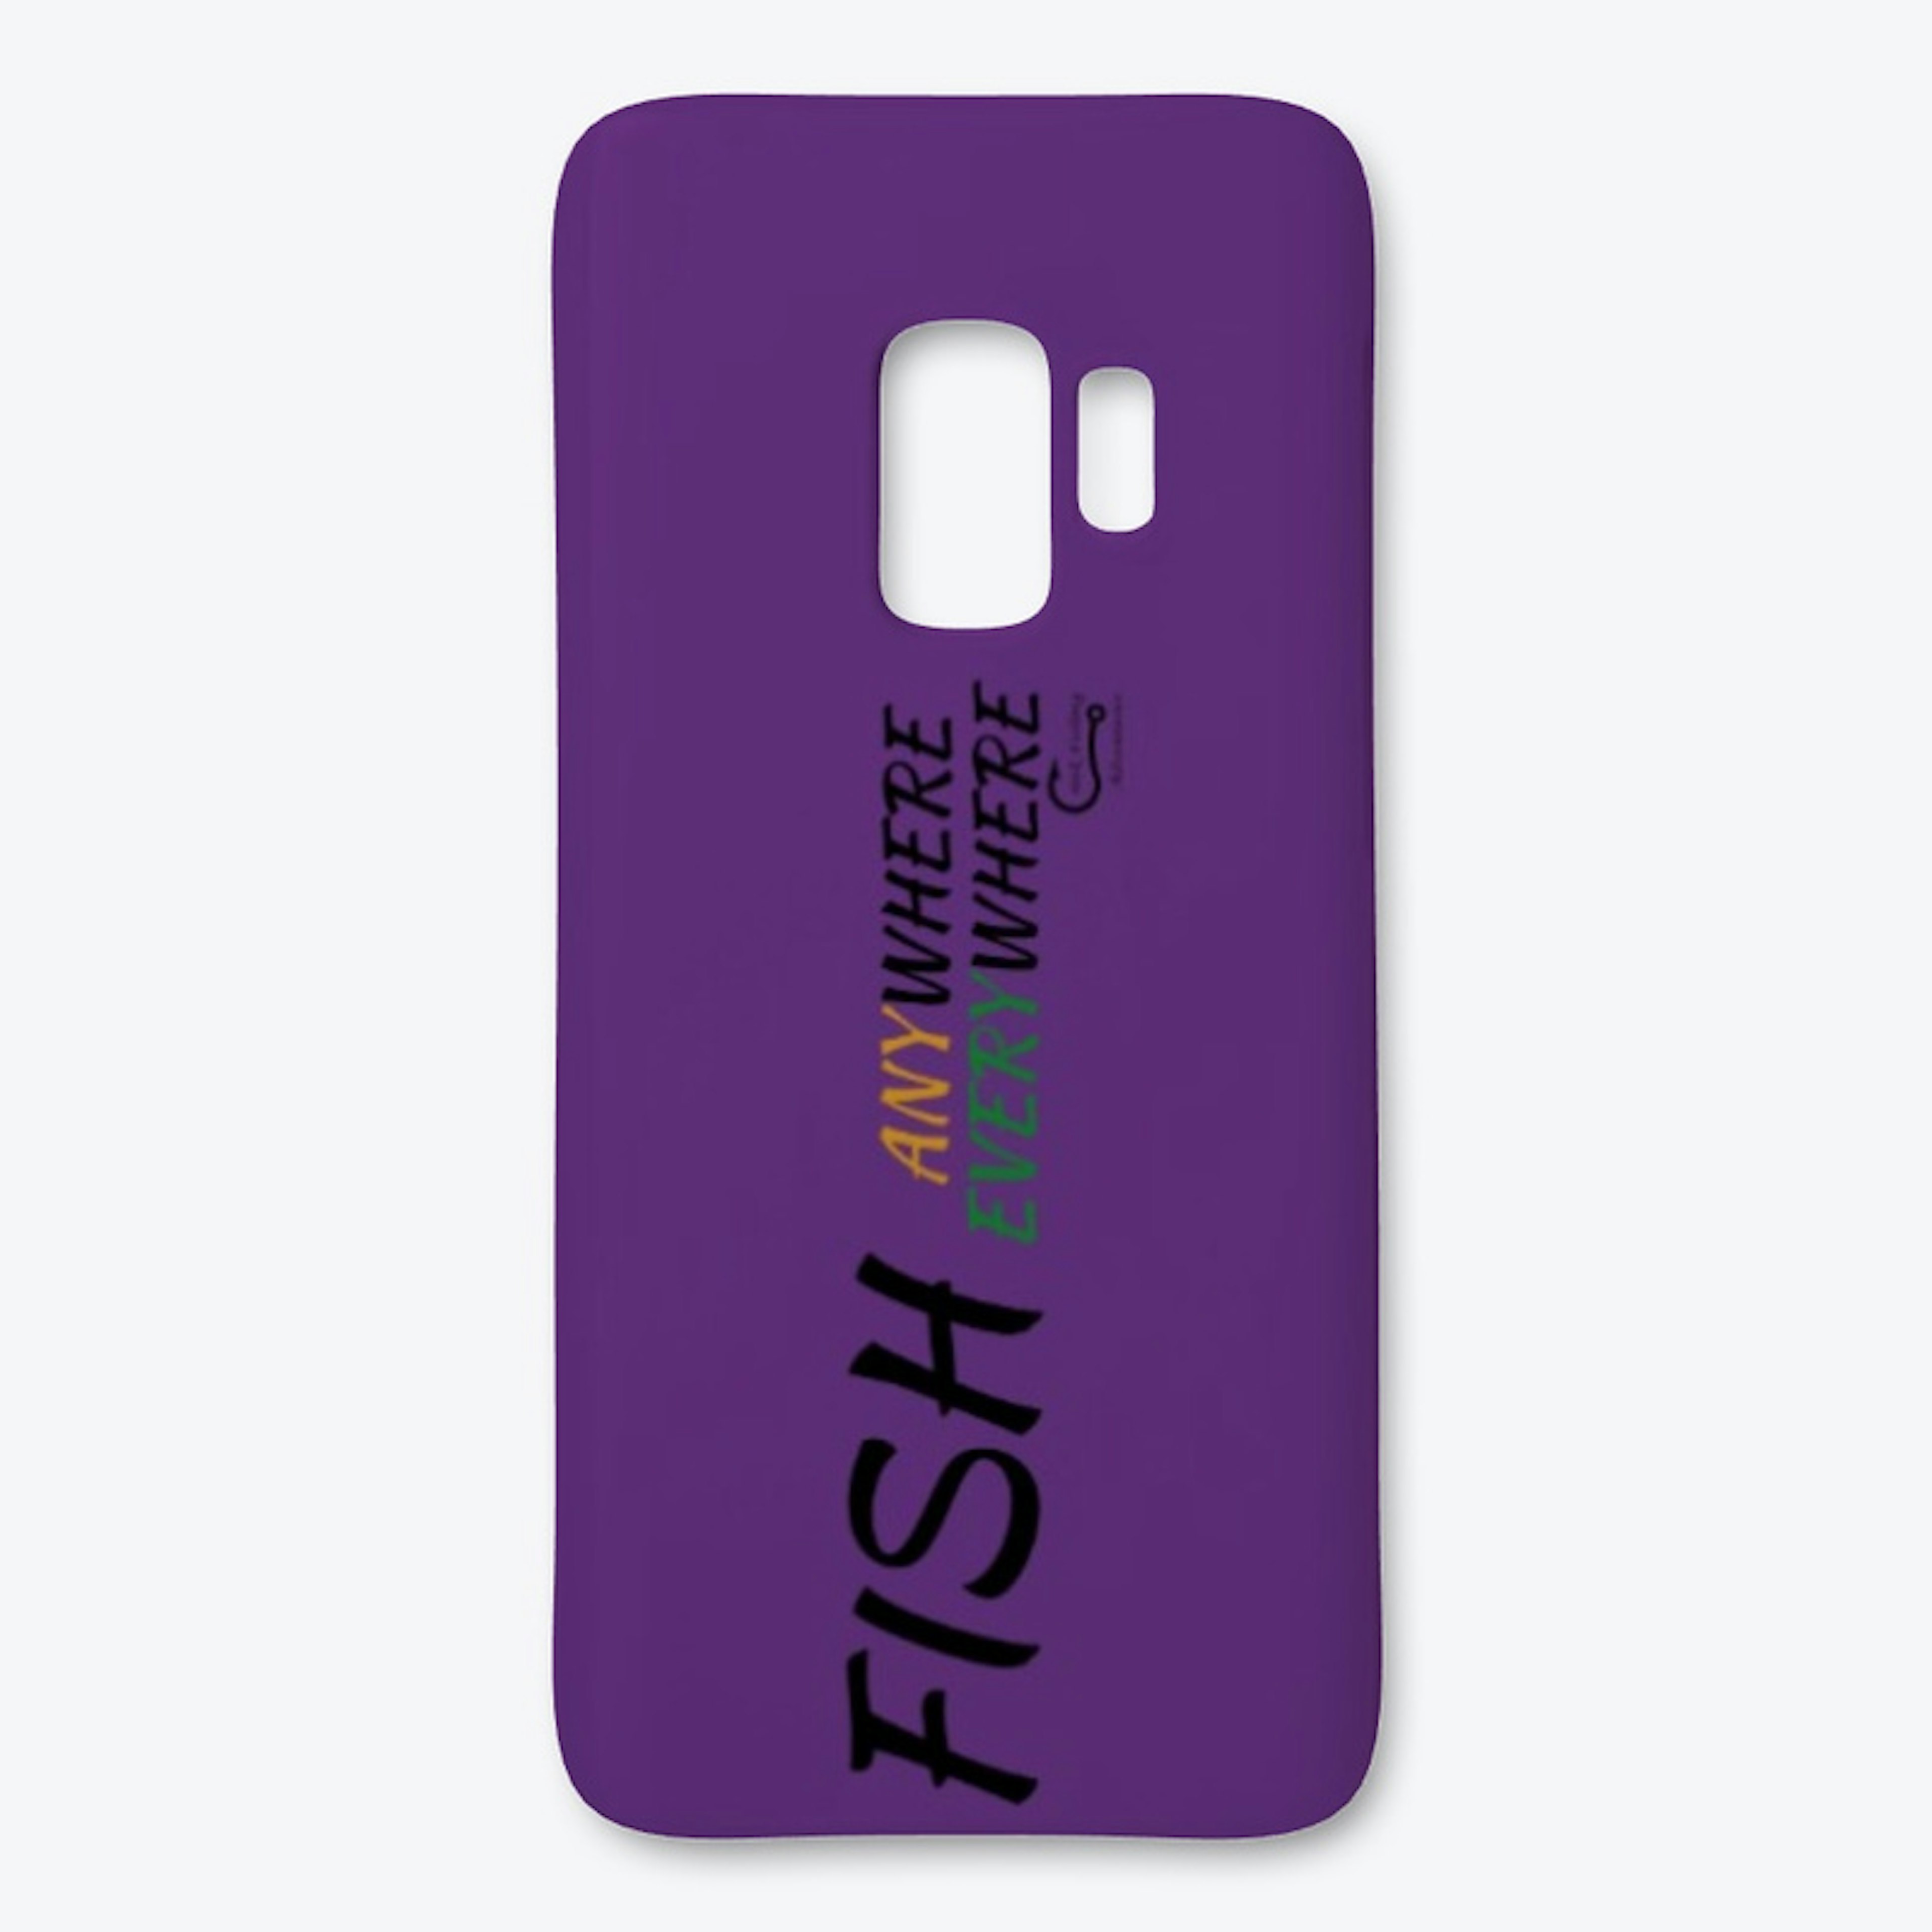 Fish Any/Everywhere iPhone/Samsung Case